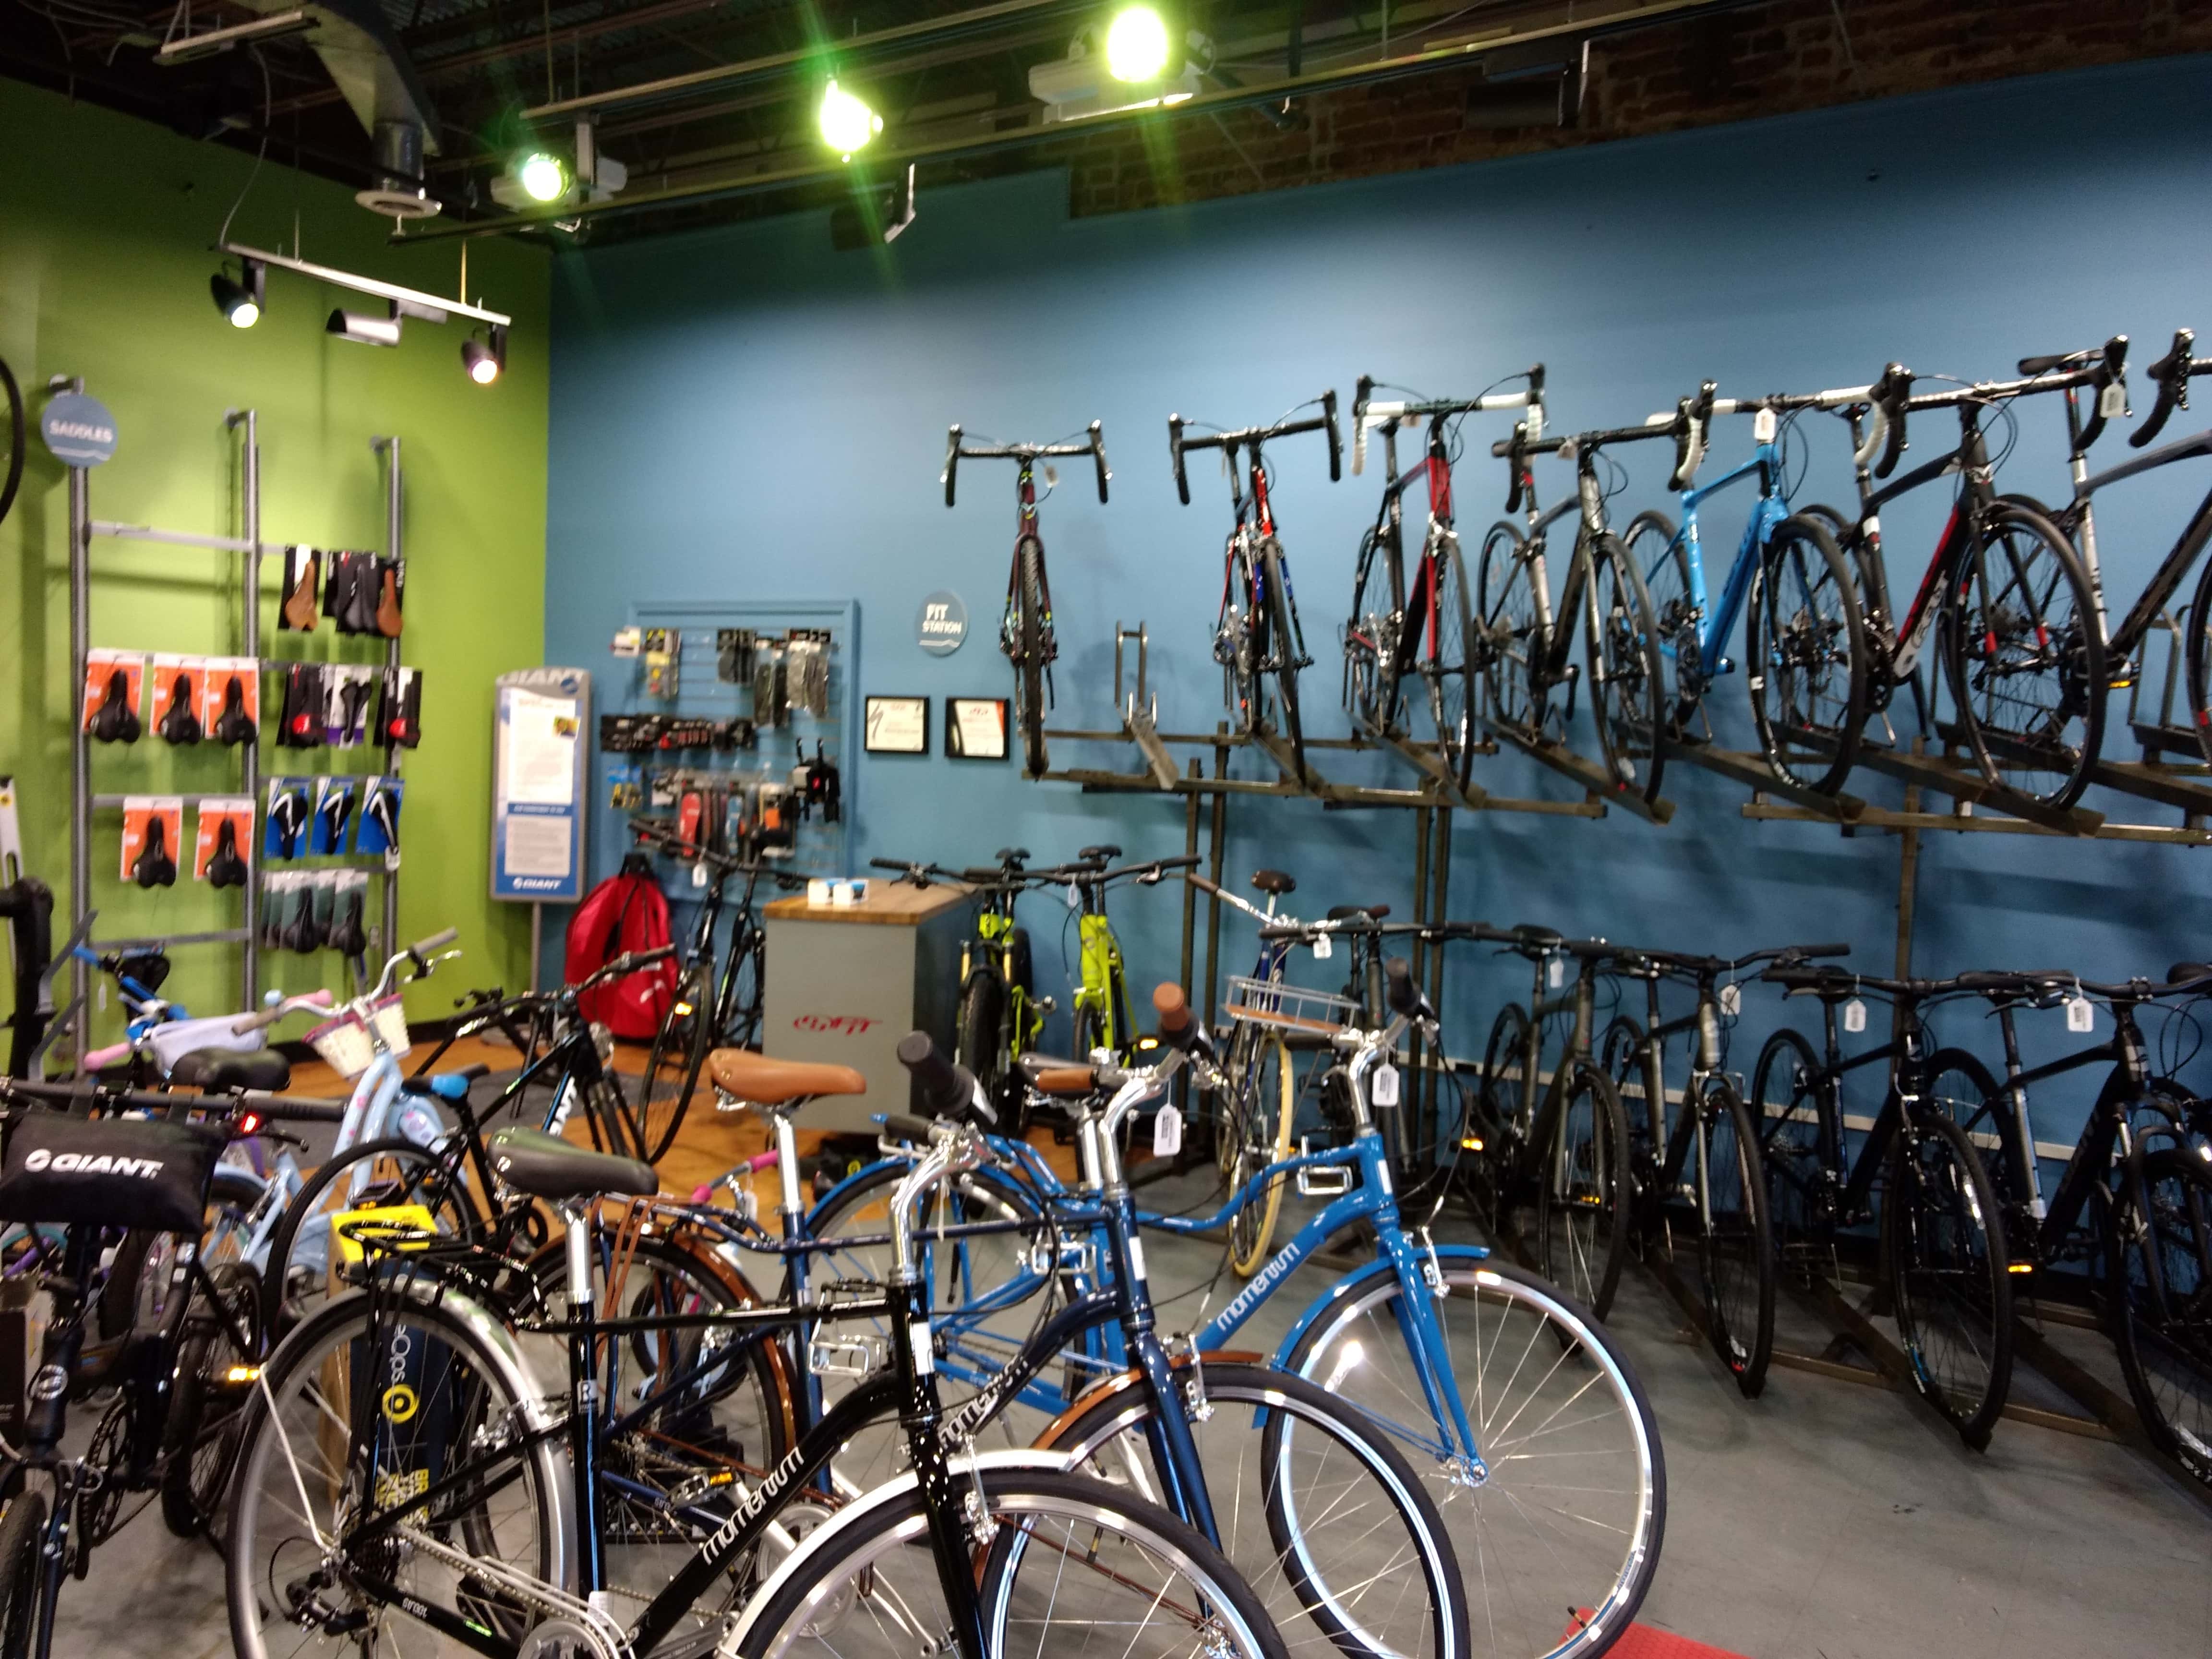 Arrow Bicycle - Hyattsville, MD, US, bicycle dealers near me